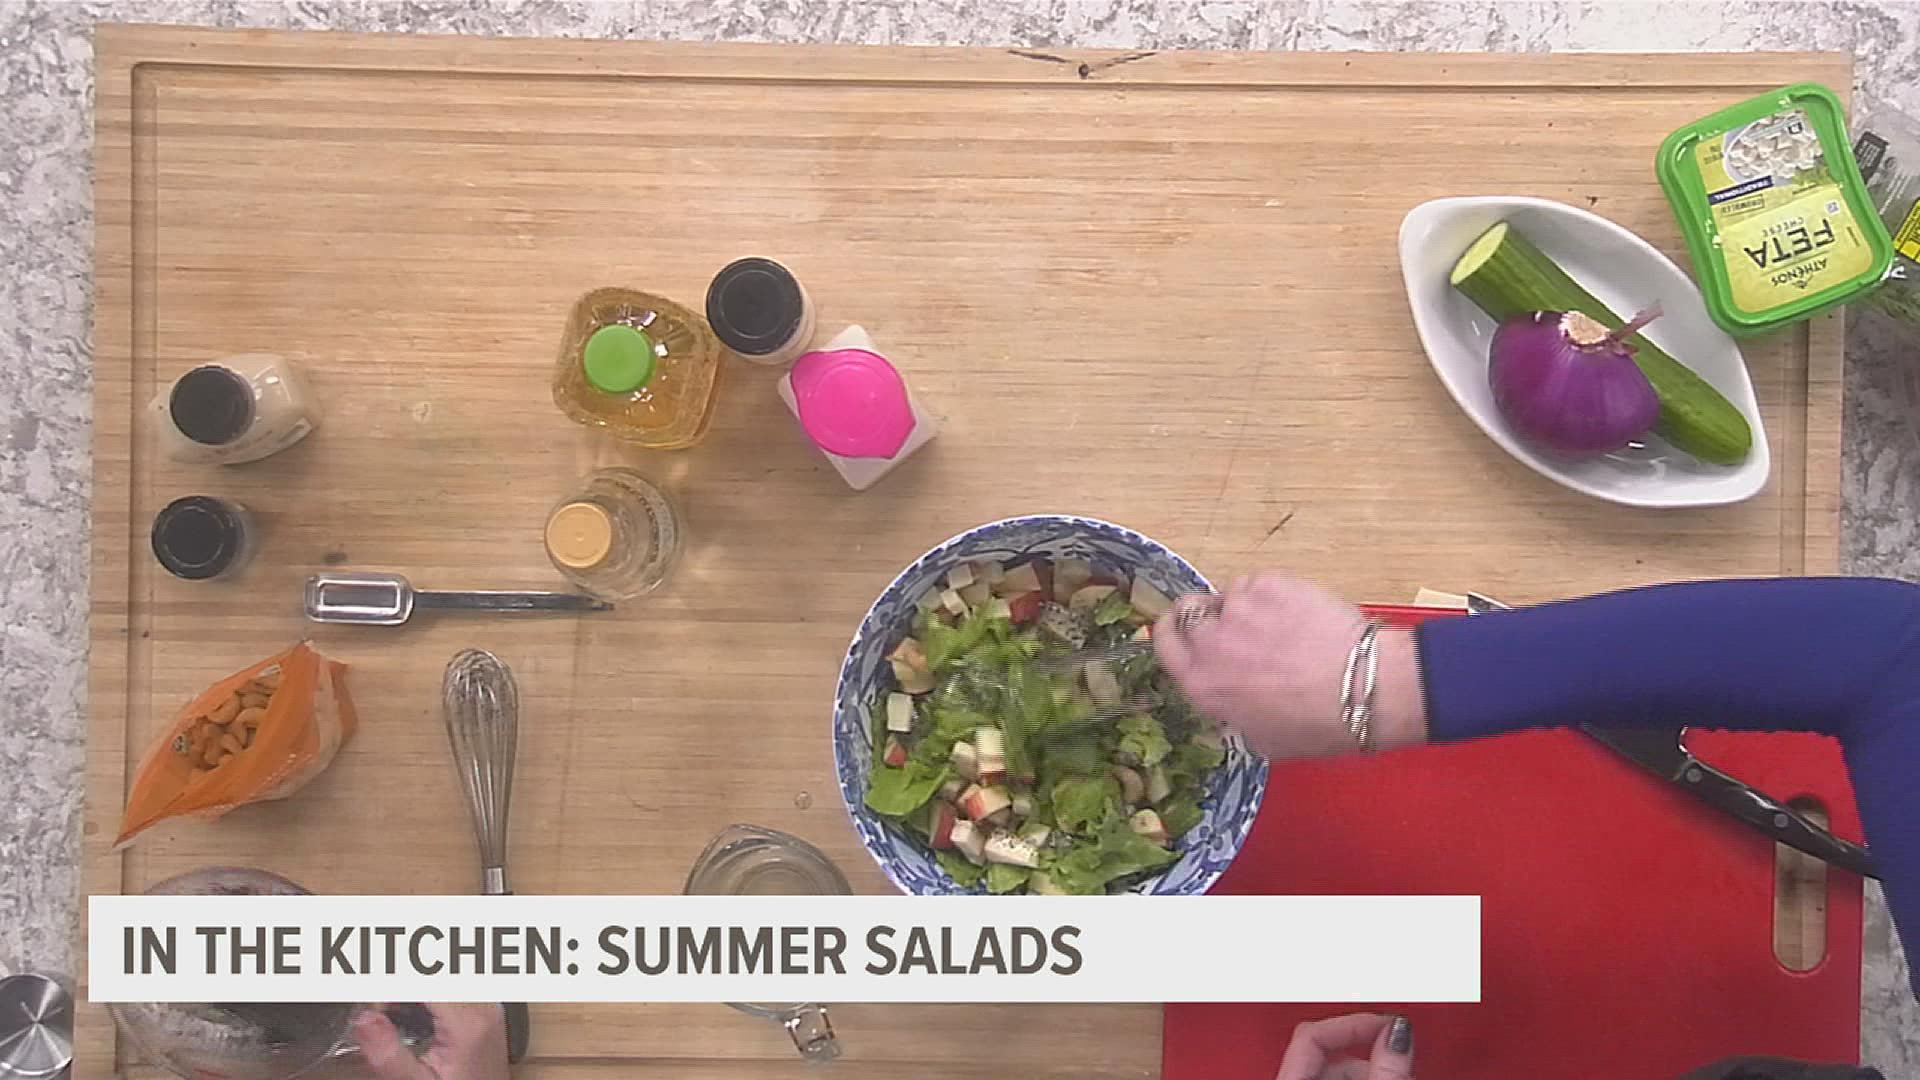 News 8's Morgan Strackbein shares the recipe for a poppyseed salad that even the kids will love!